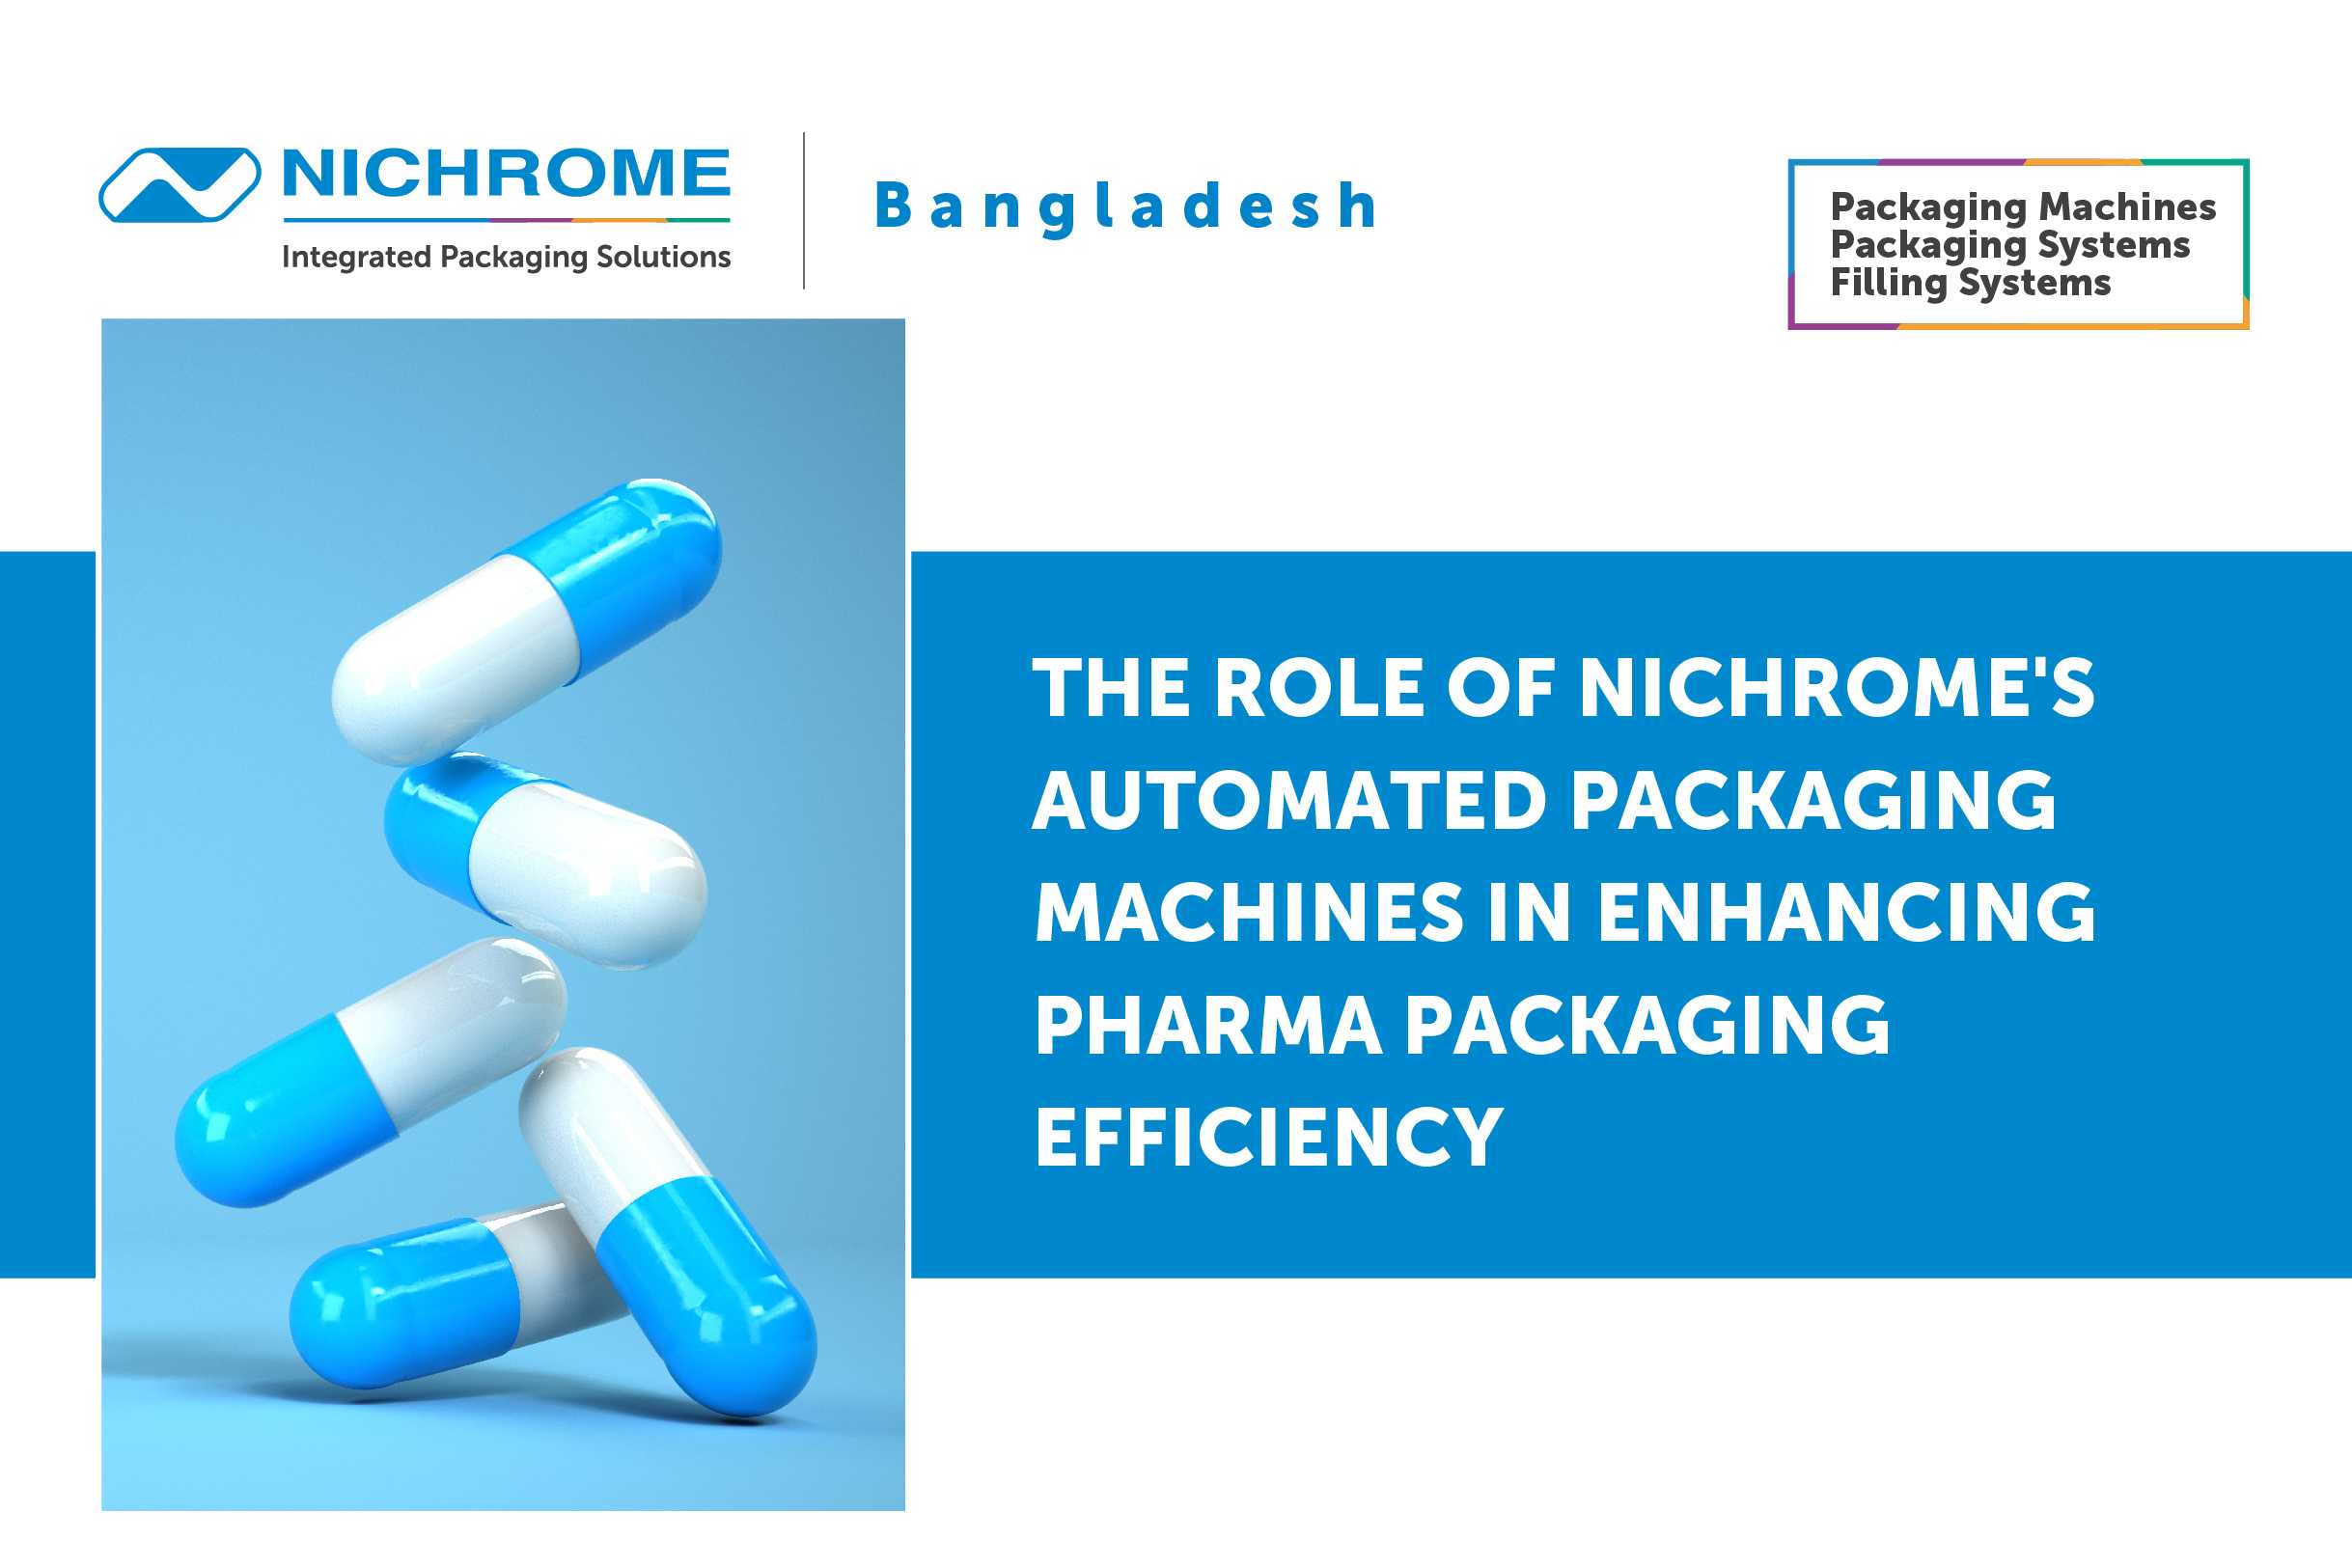 The Role Of Nichrome's Automated Packaging Machines In Enhancing Pharma Packaging Efficiency